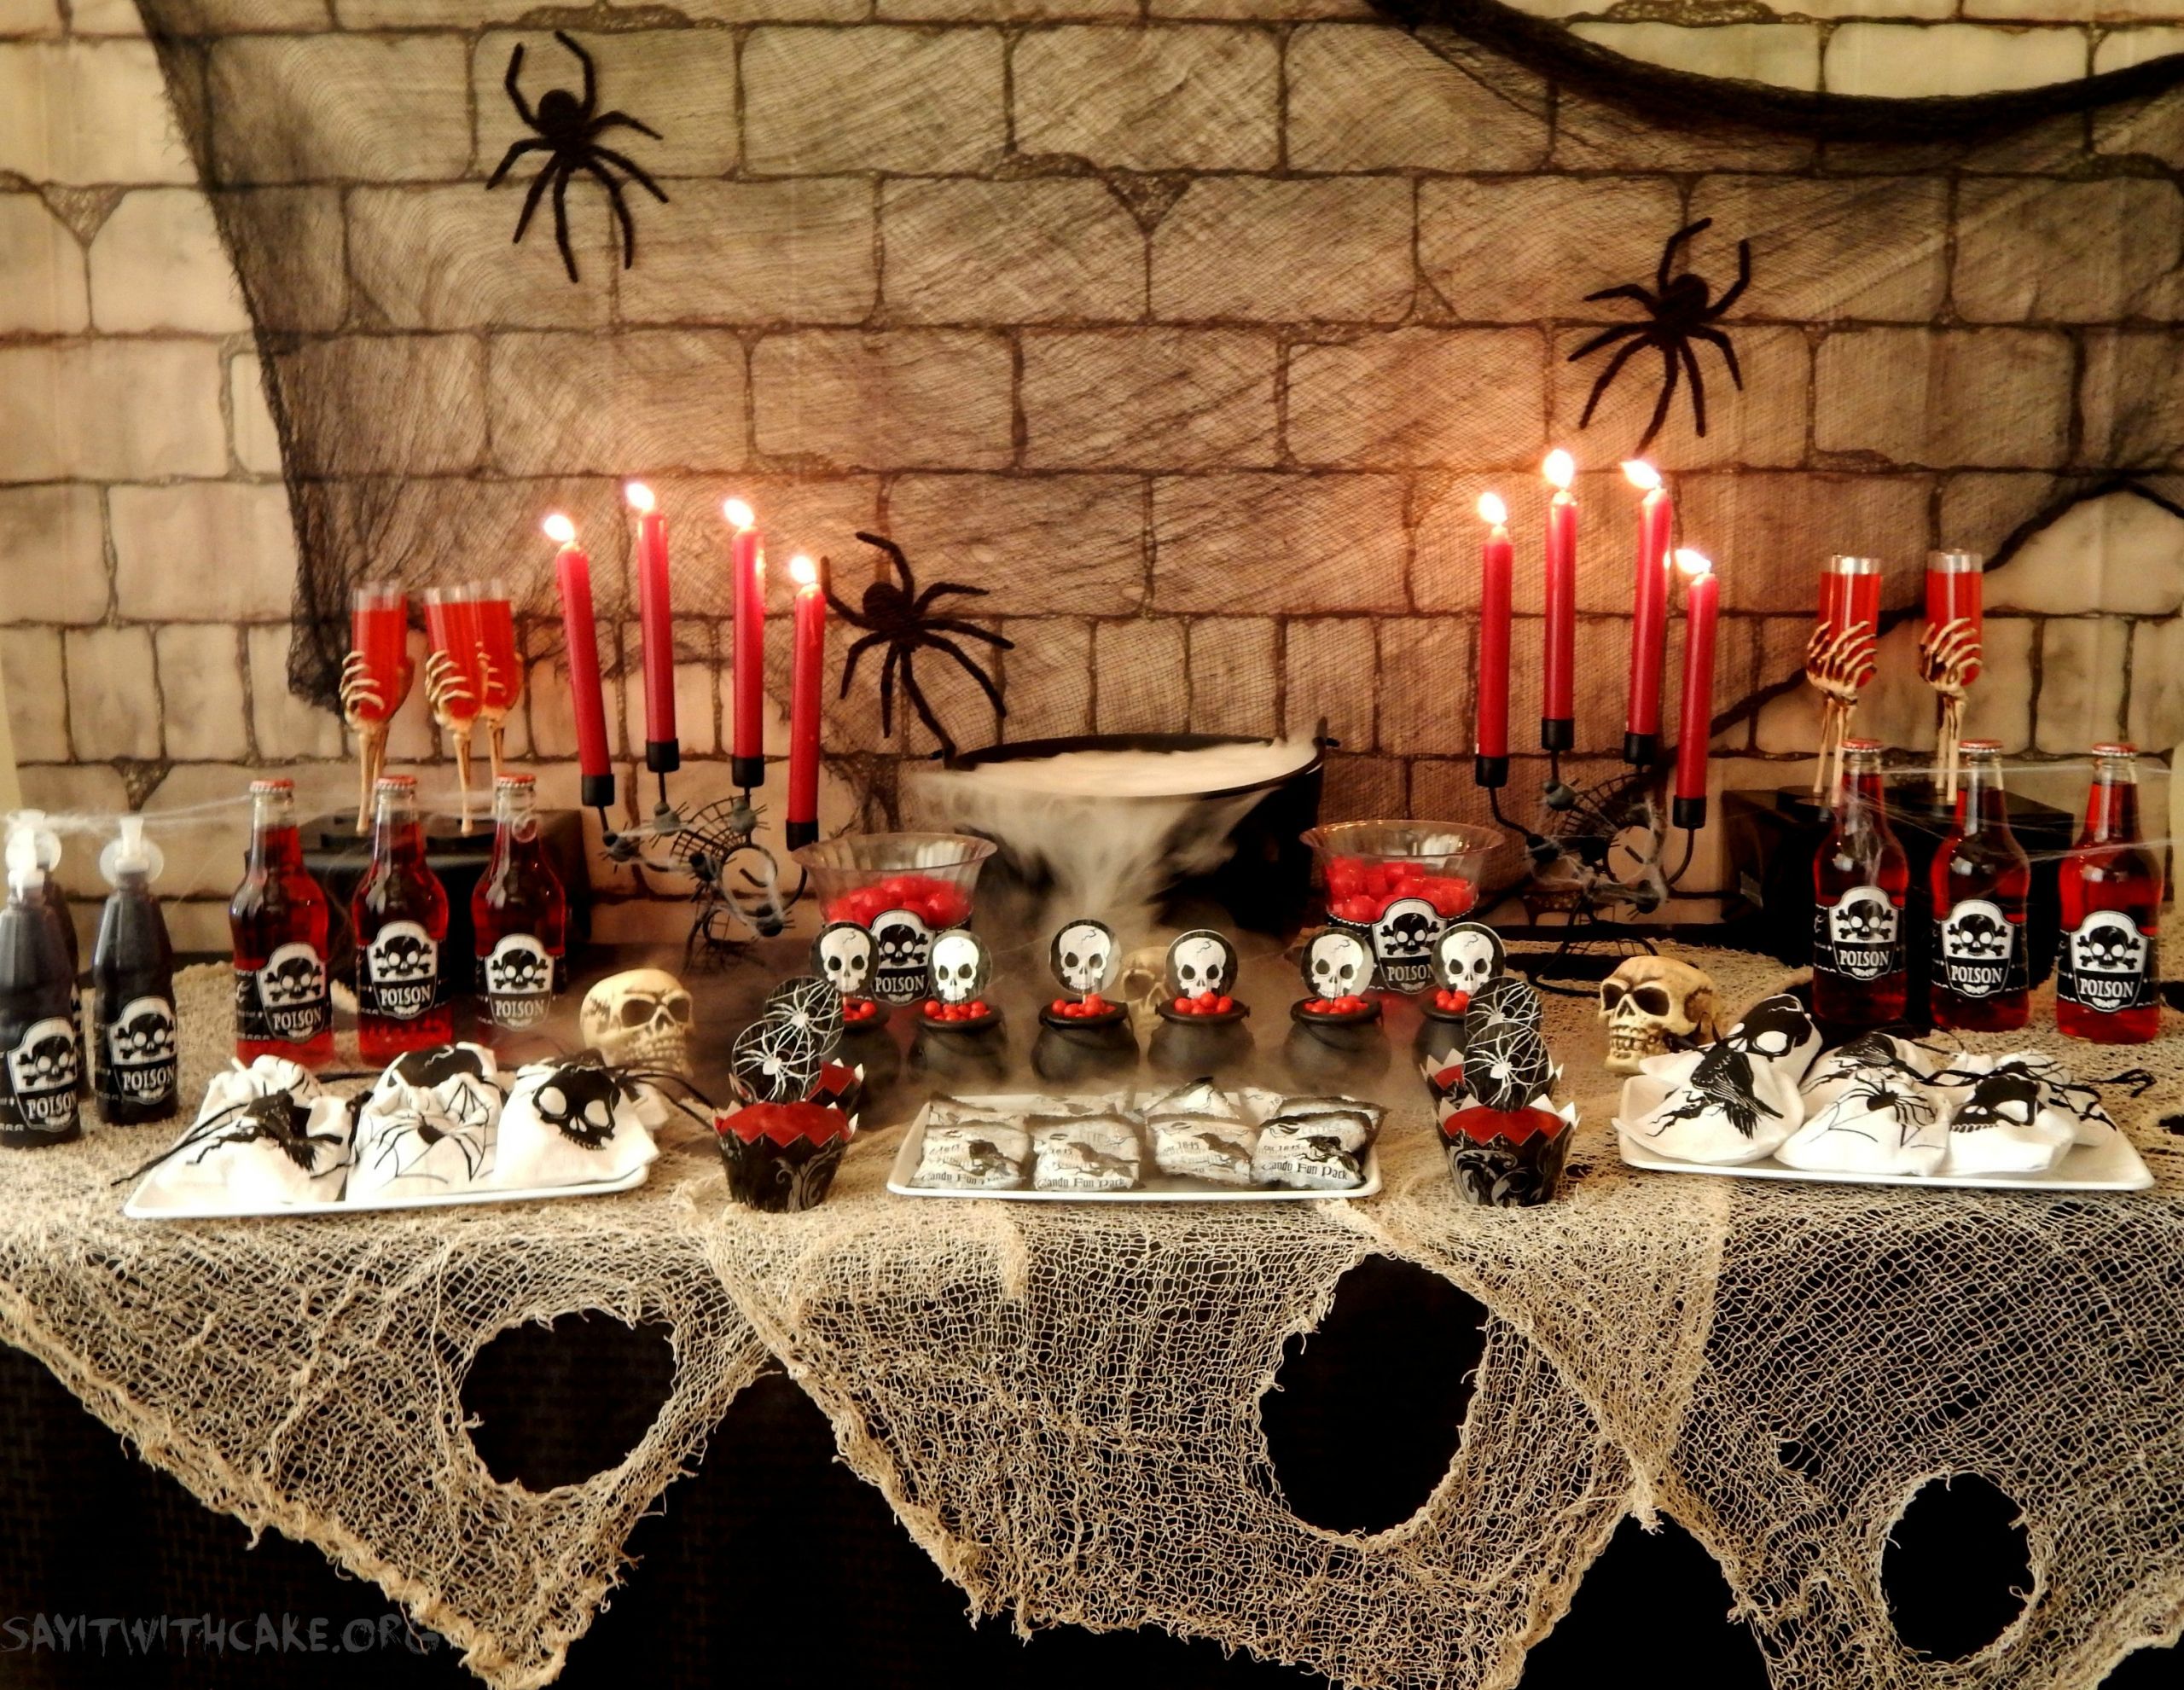 The Best Halloween Party Table Ideas - Home, Family, Style and Art Ideas